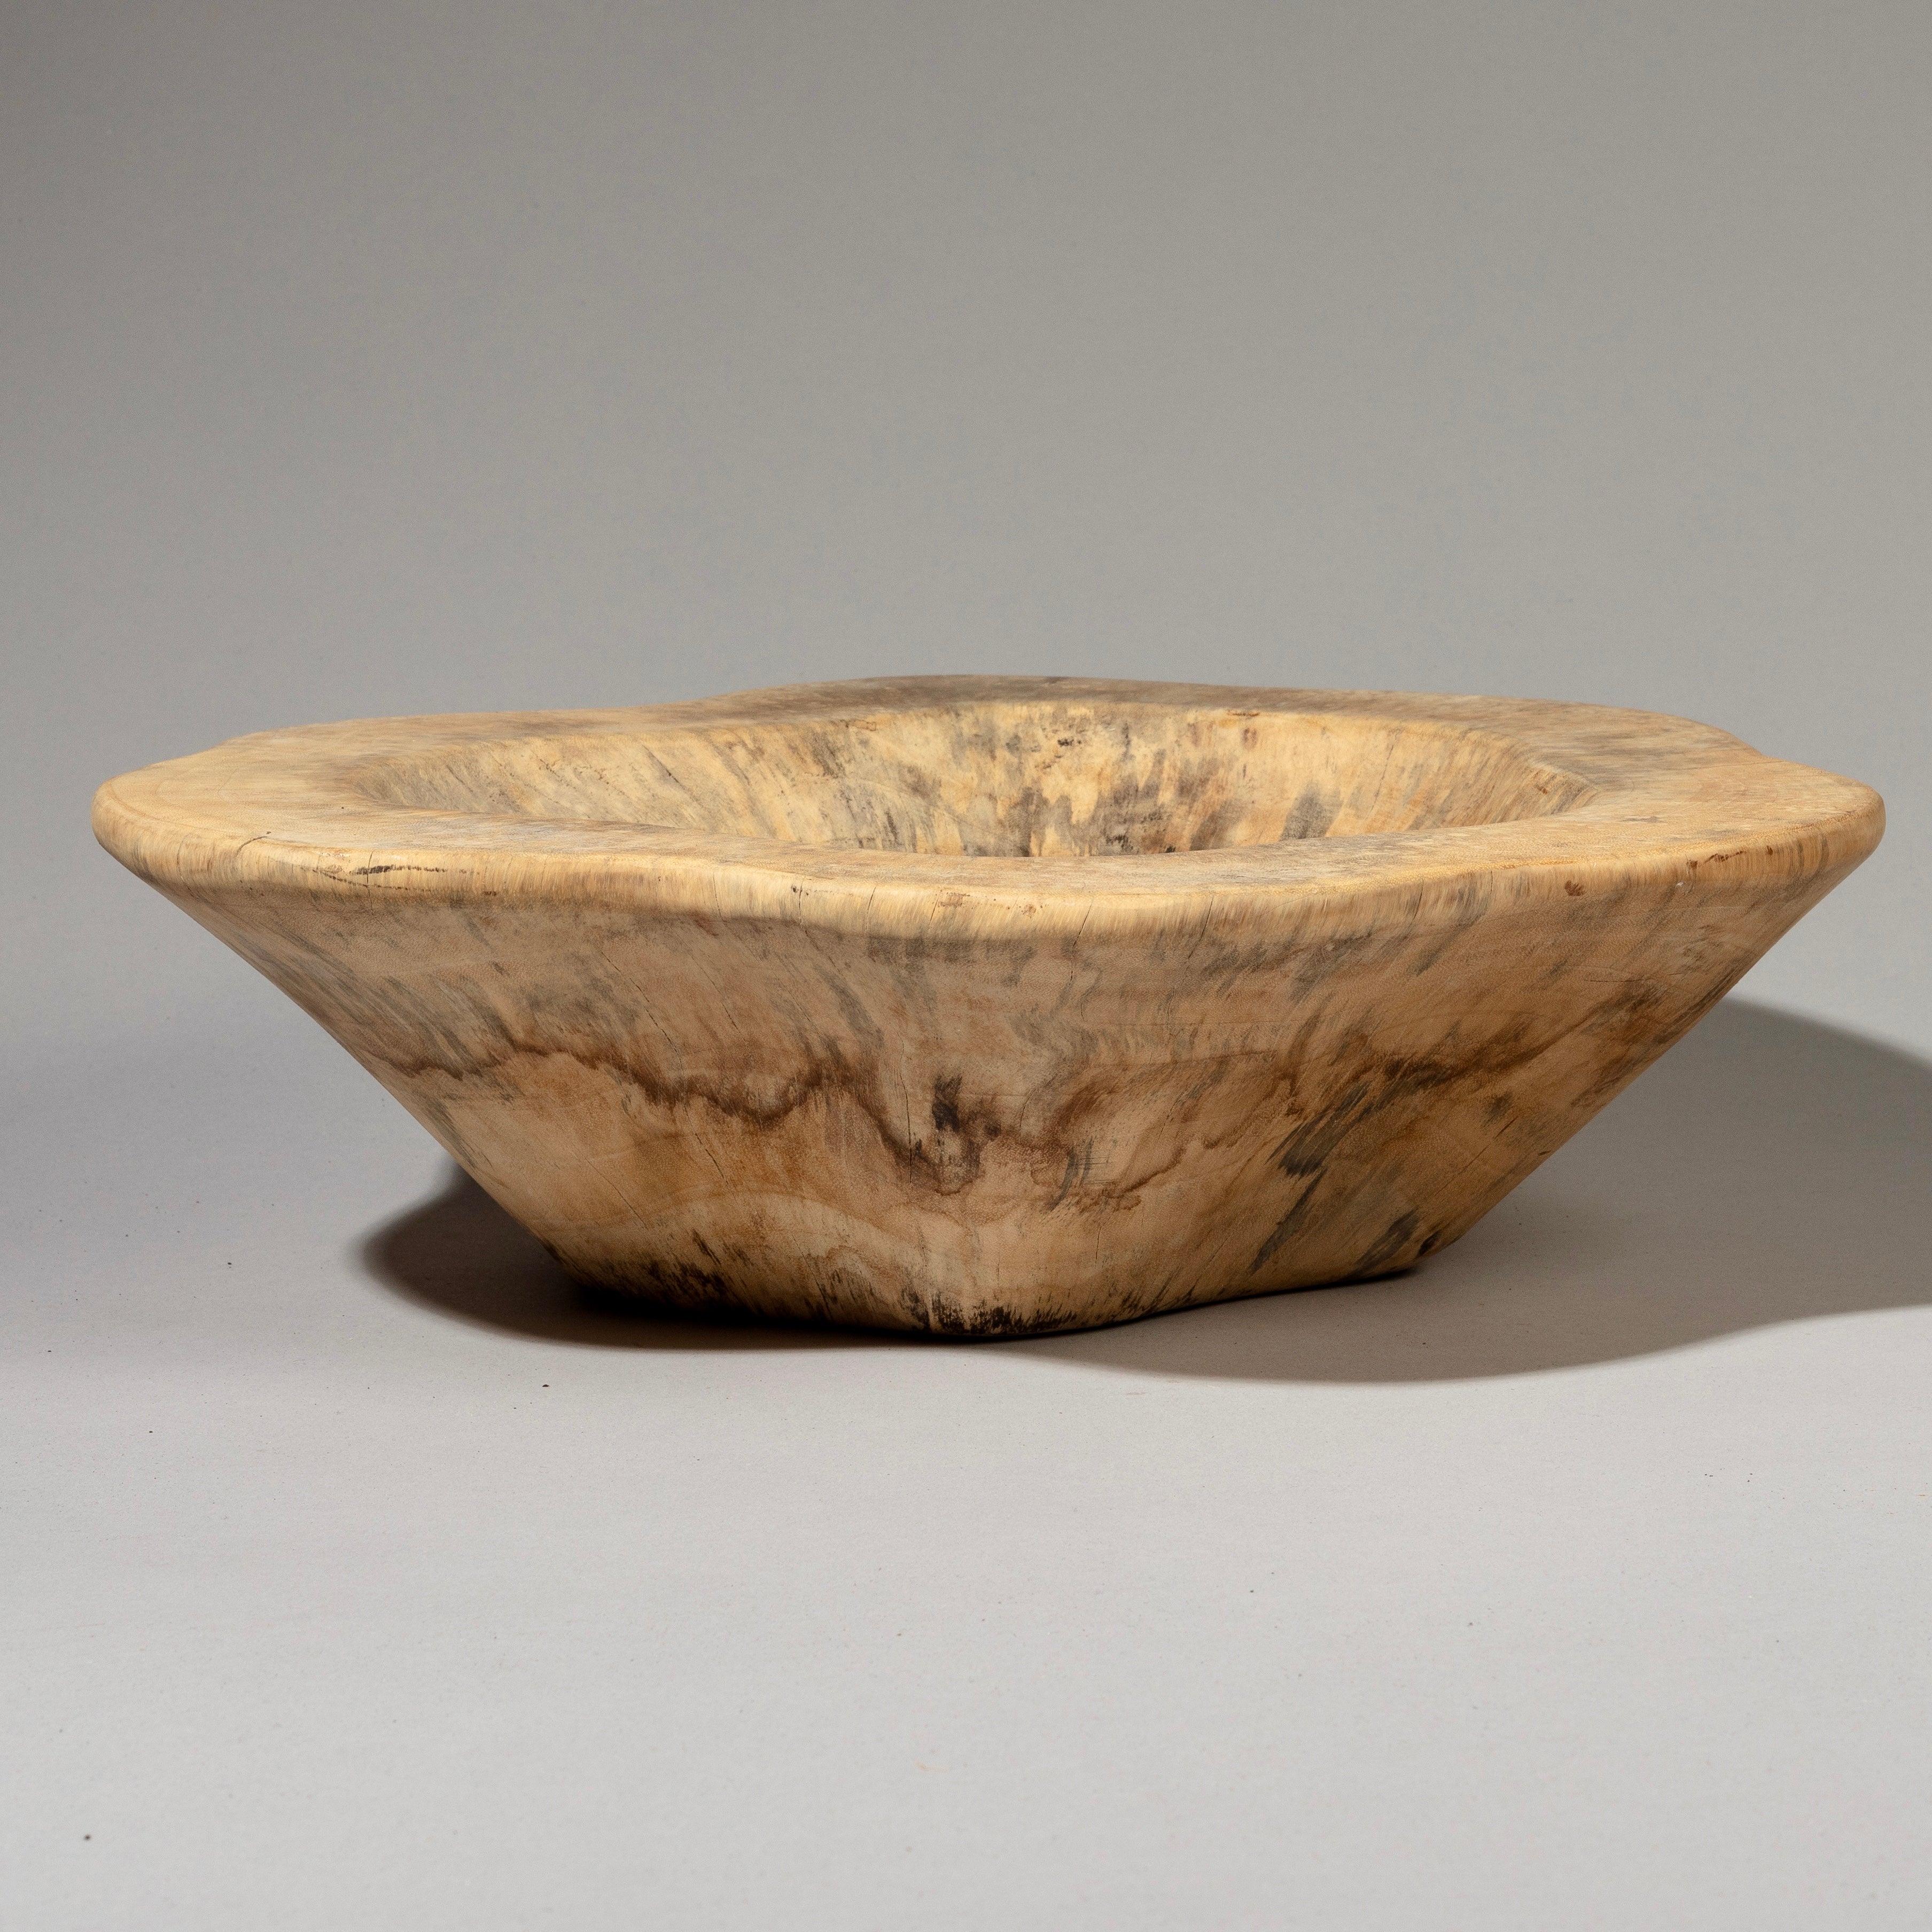 A UNIQUELY SHAPED TAMARIND WOOD BOWL FROM INDONESIA ( No 1879)